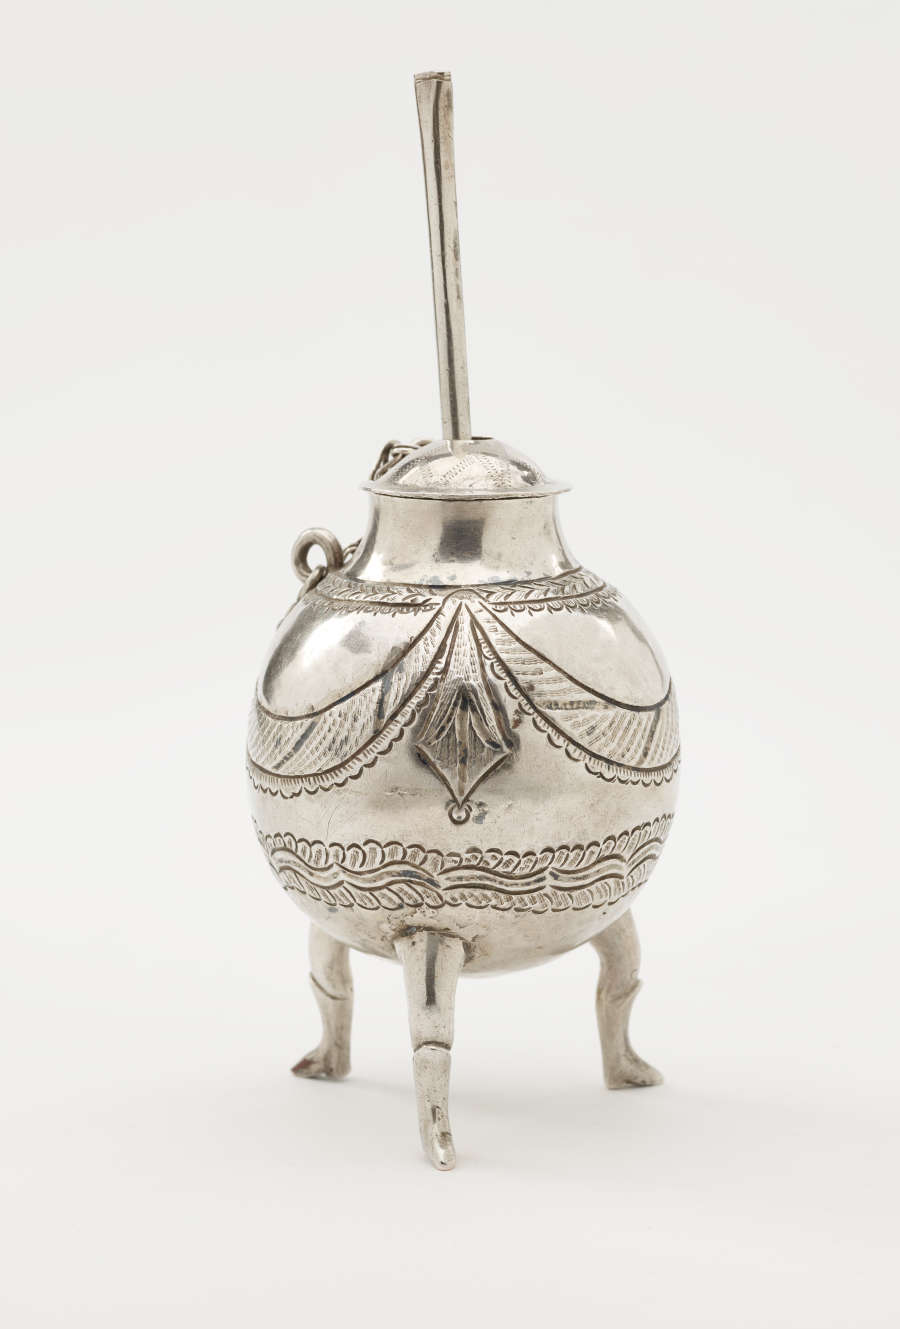 A silver covered jar and dipper that has long feet, a chain connecting the body and lid.